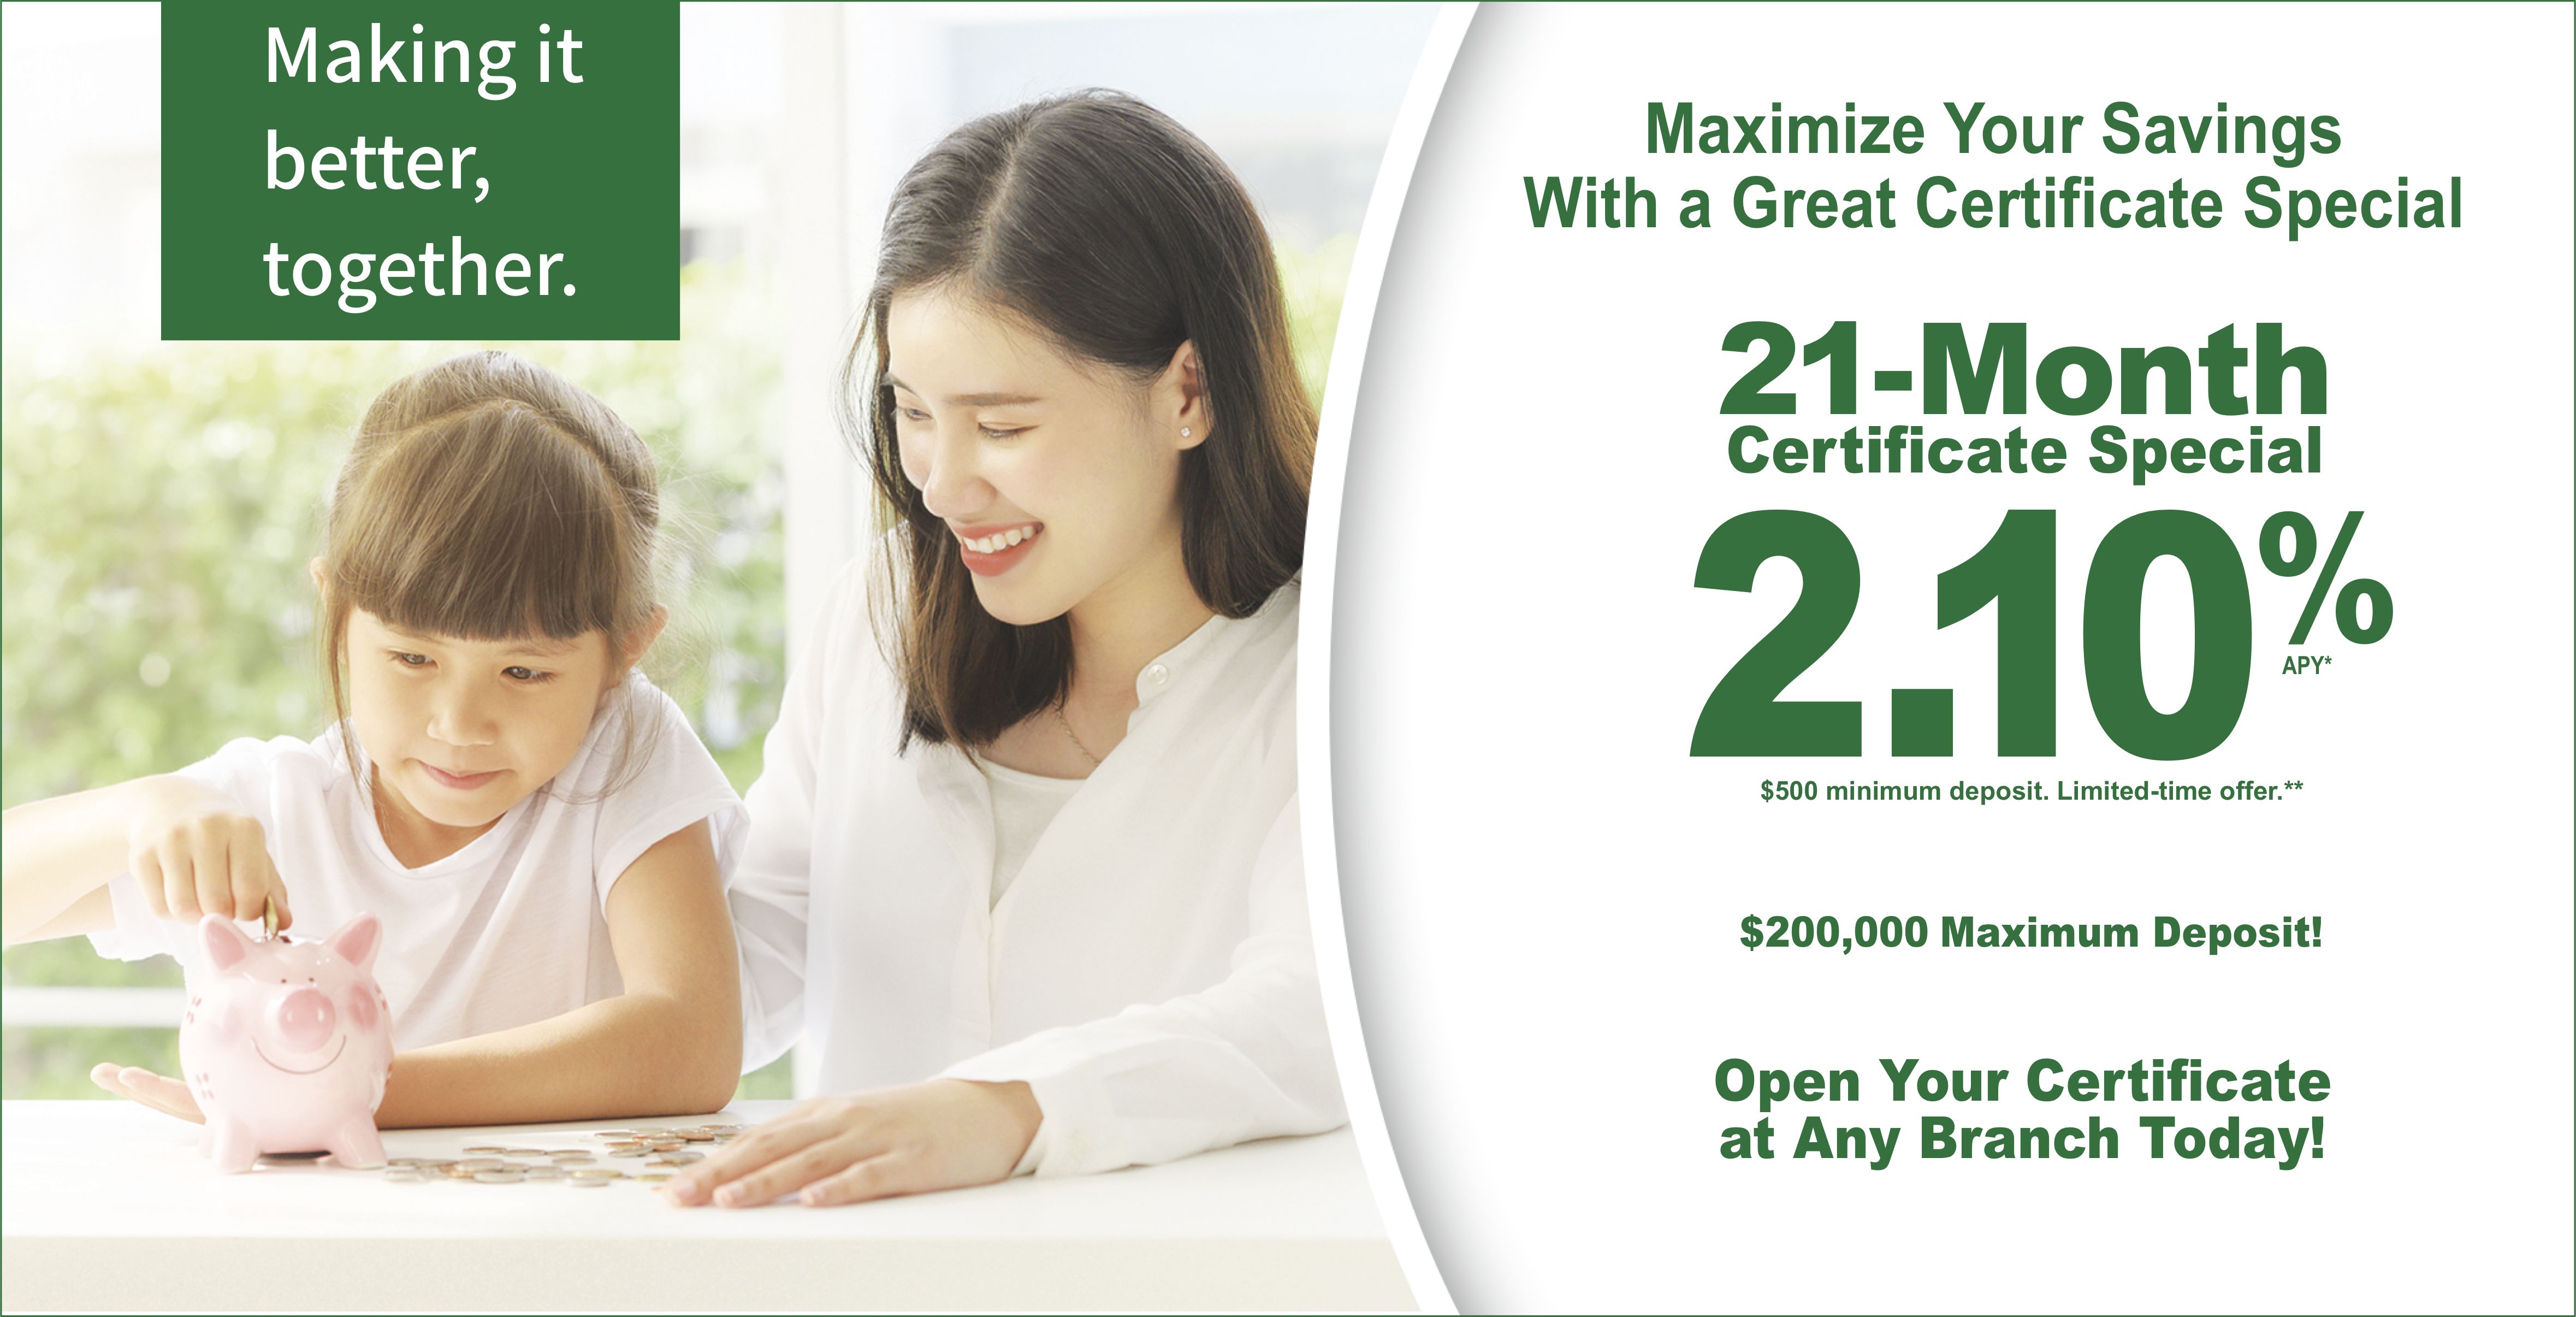 Maximize your savings with a great certificate special. 21-month certificate special 2.10% APY. 4%00 minimum deposit. Limited-time only.